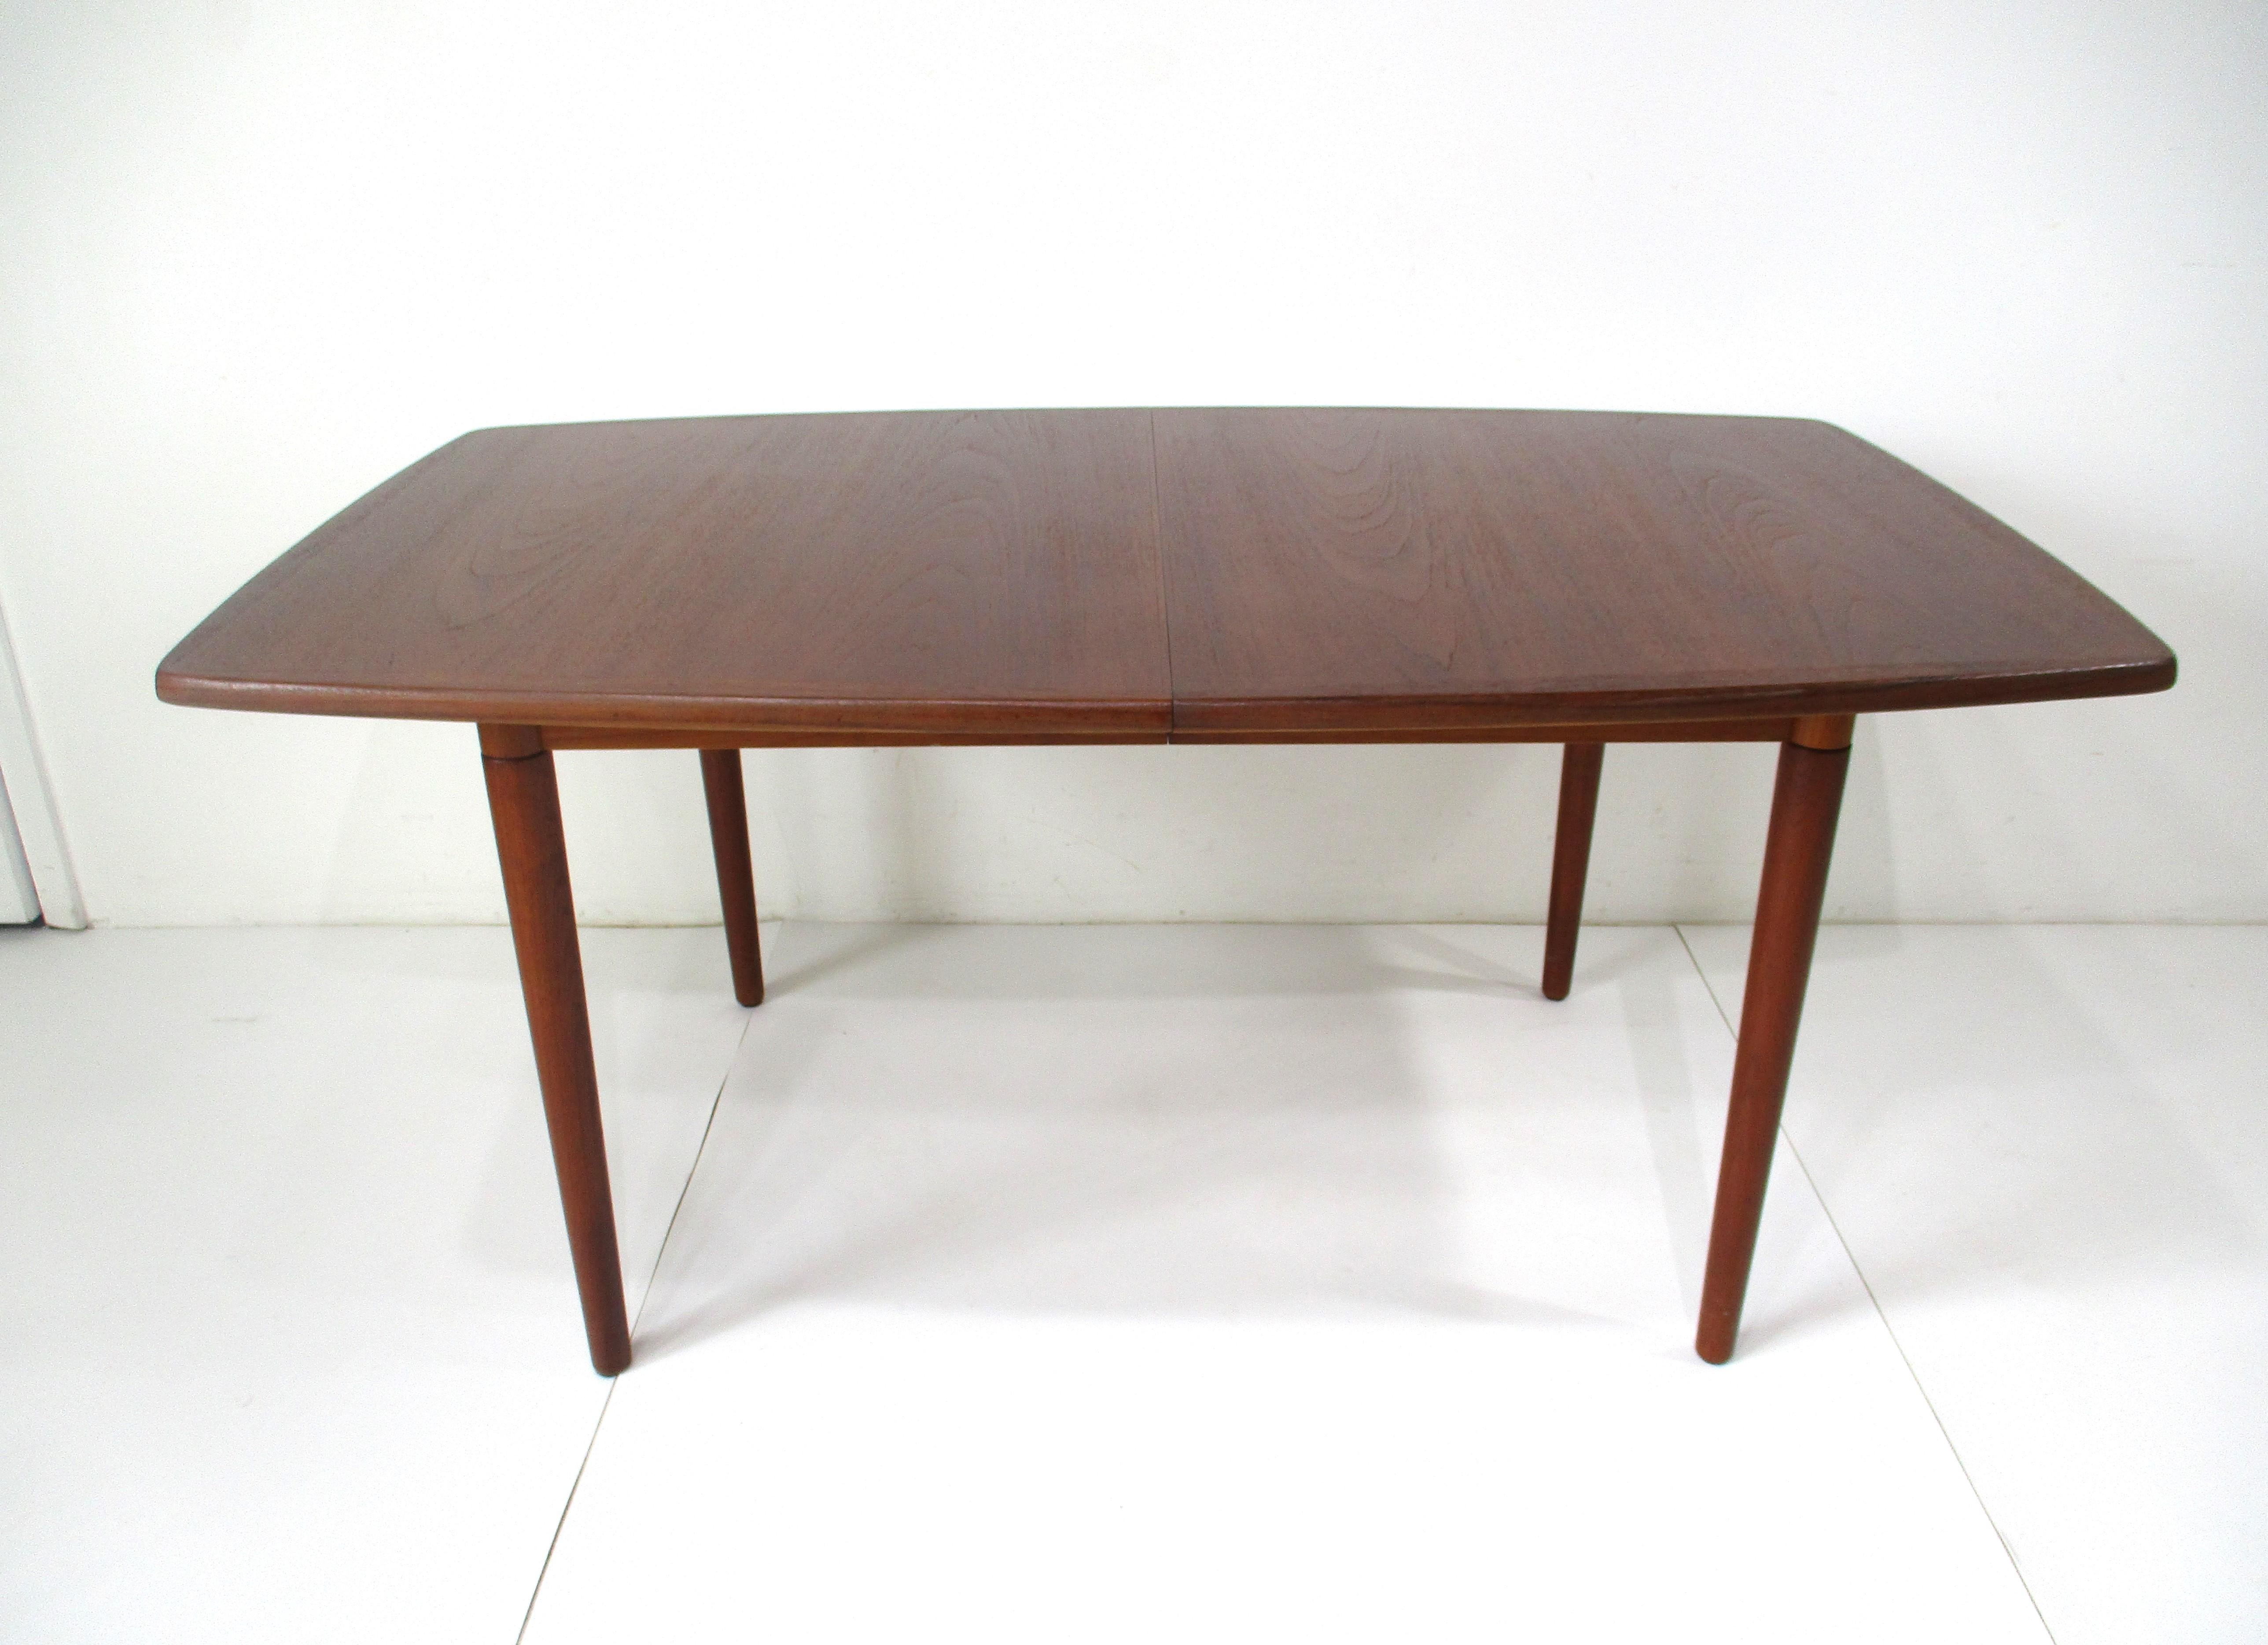 A darker teak wood dining table with nice rounded edges to the top and tapered legs having two 16.63